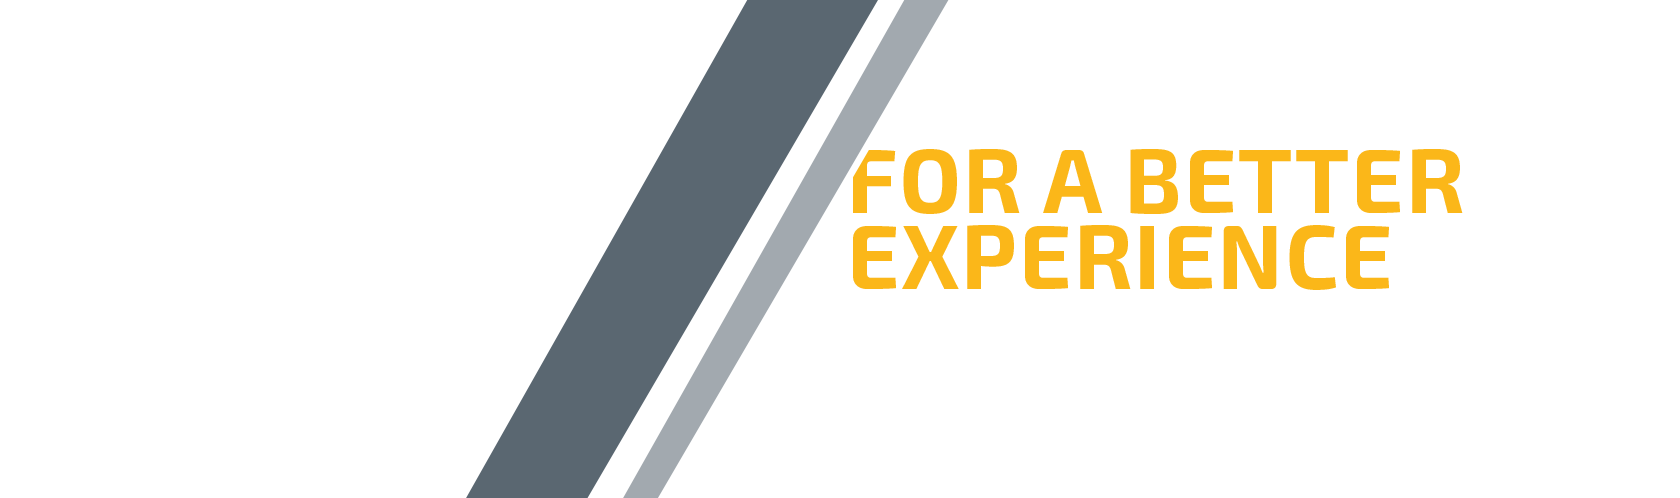 image says "For a better experience"